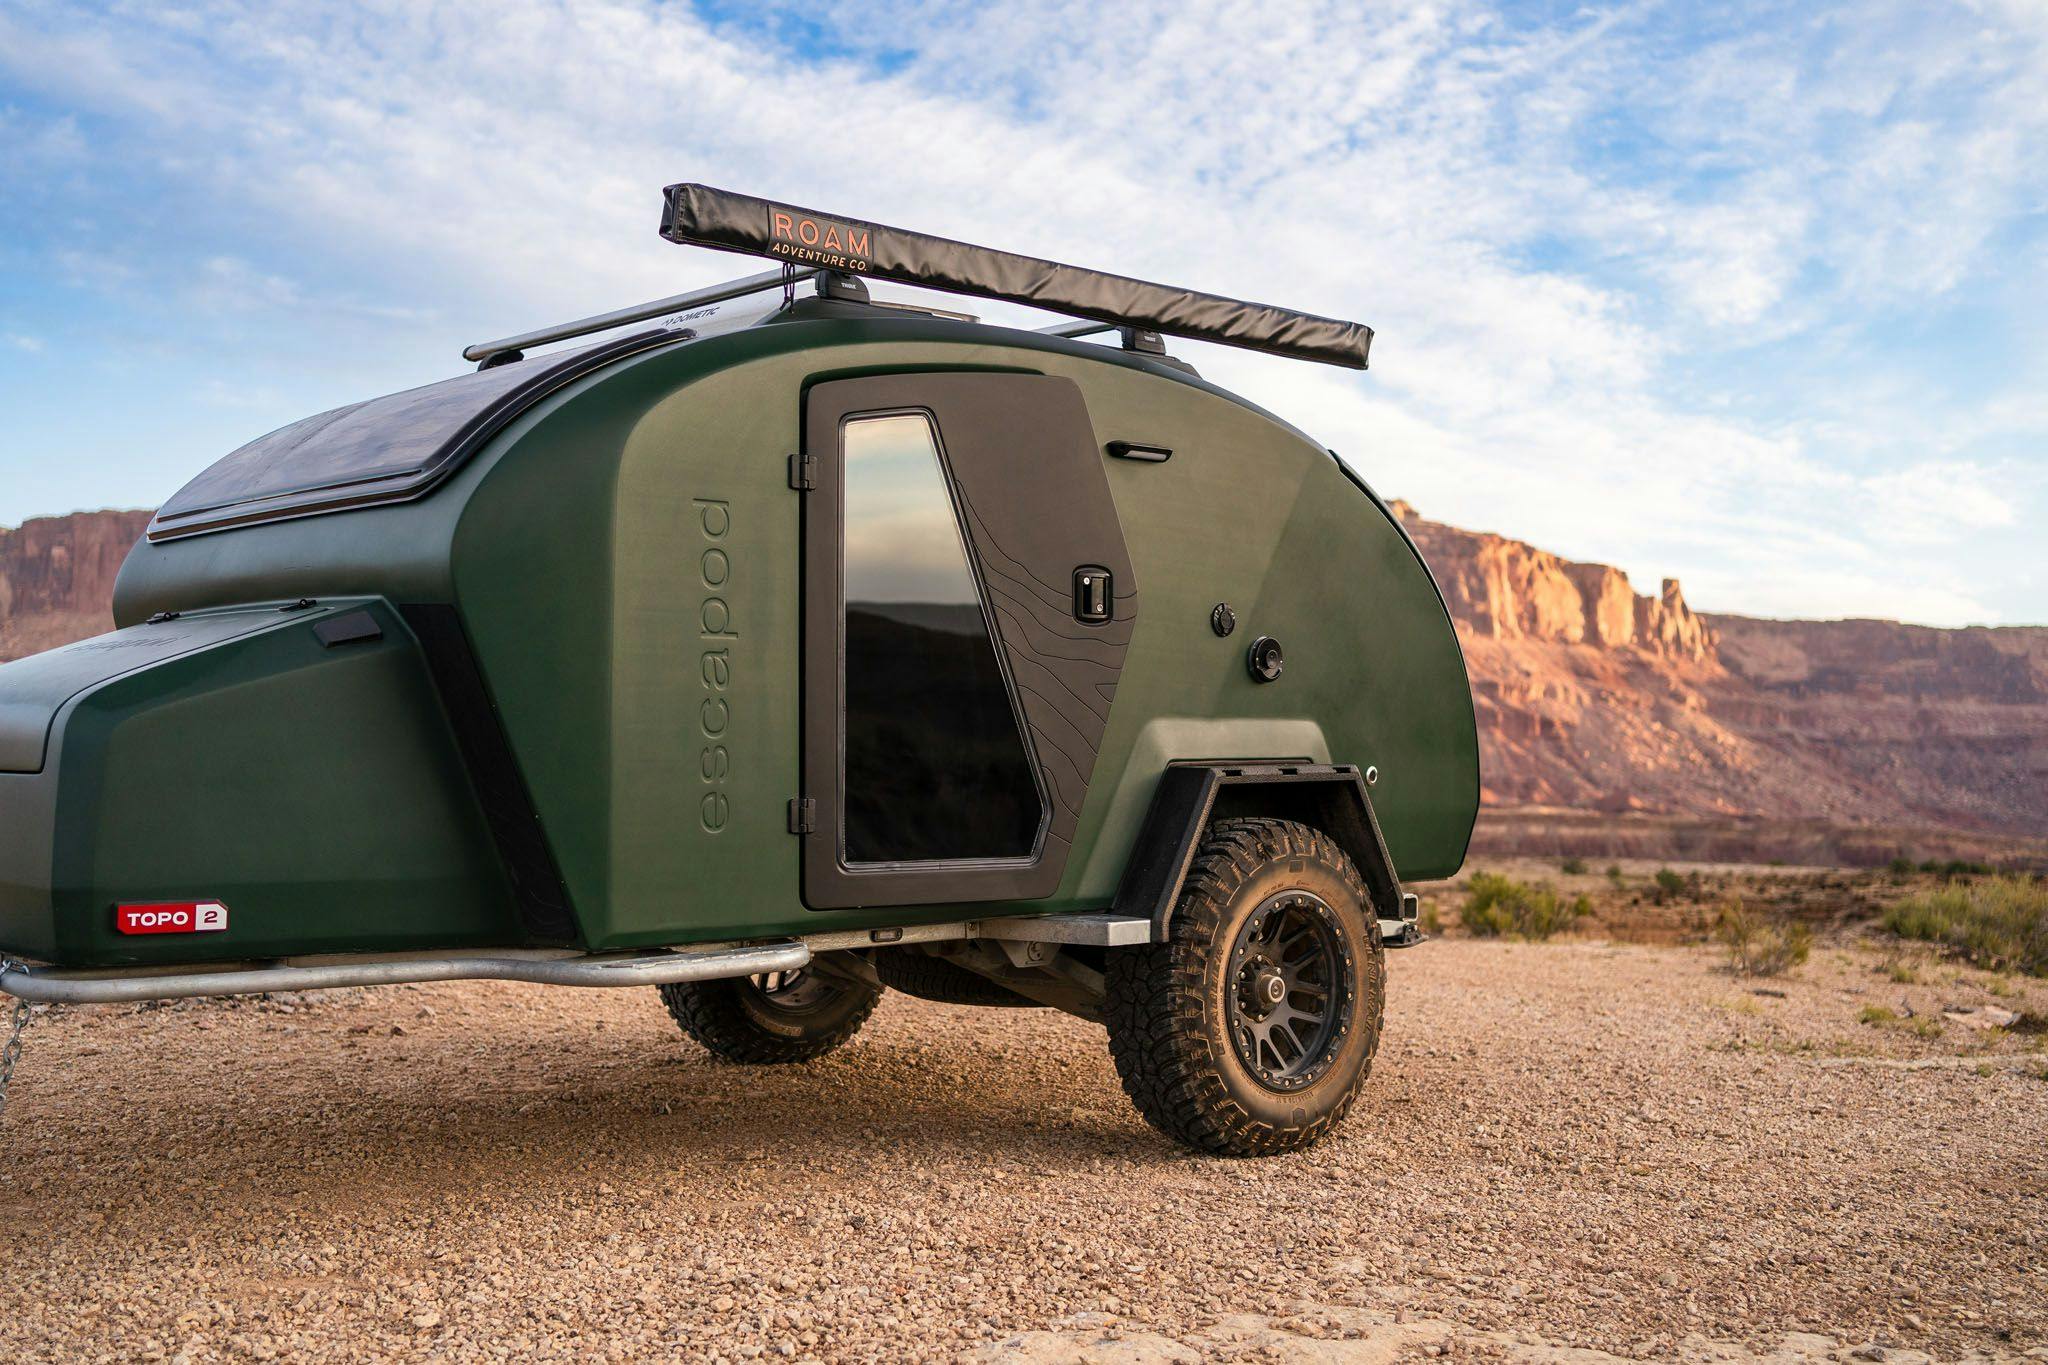 TOPO2, an offroad trailer, parked in the deserts of Utah.